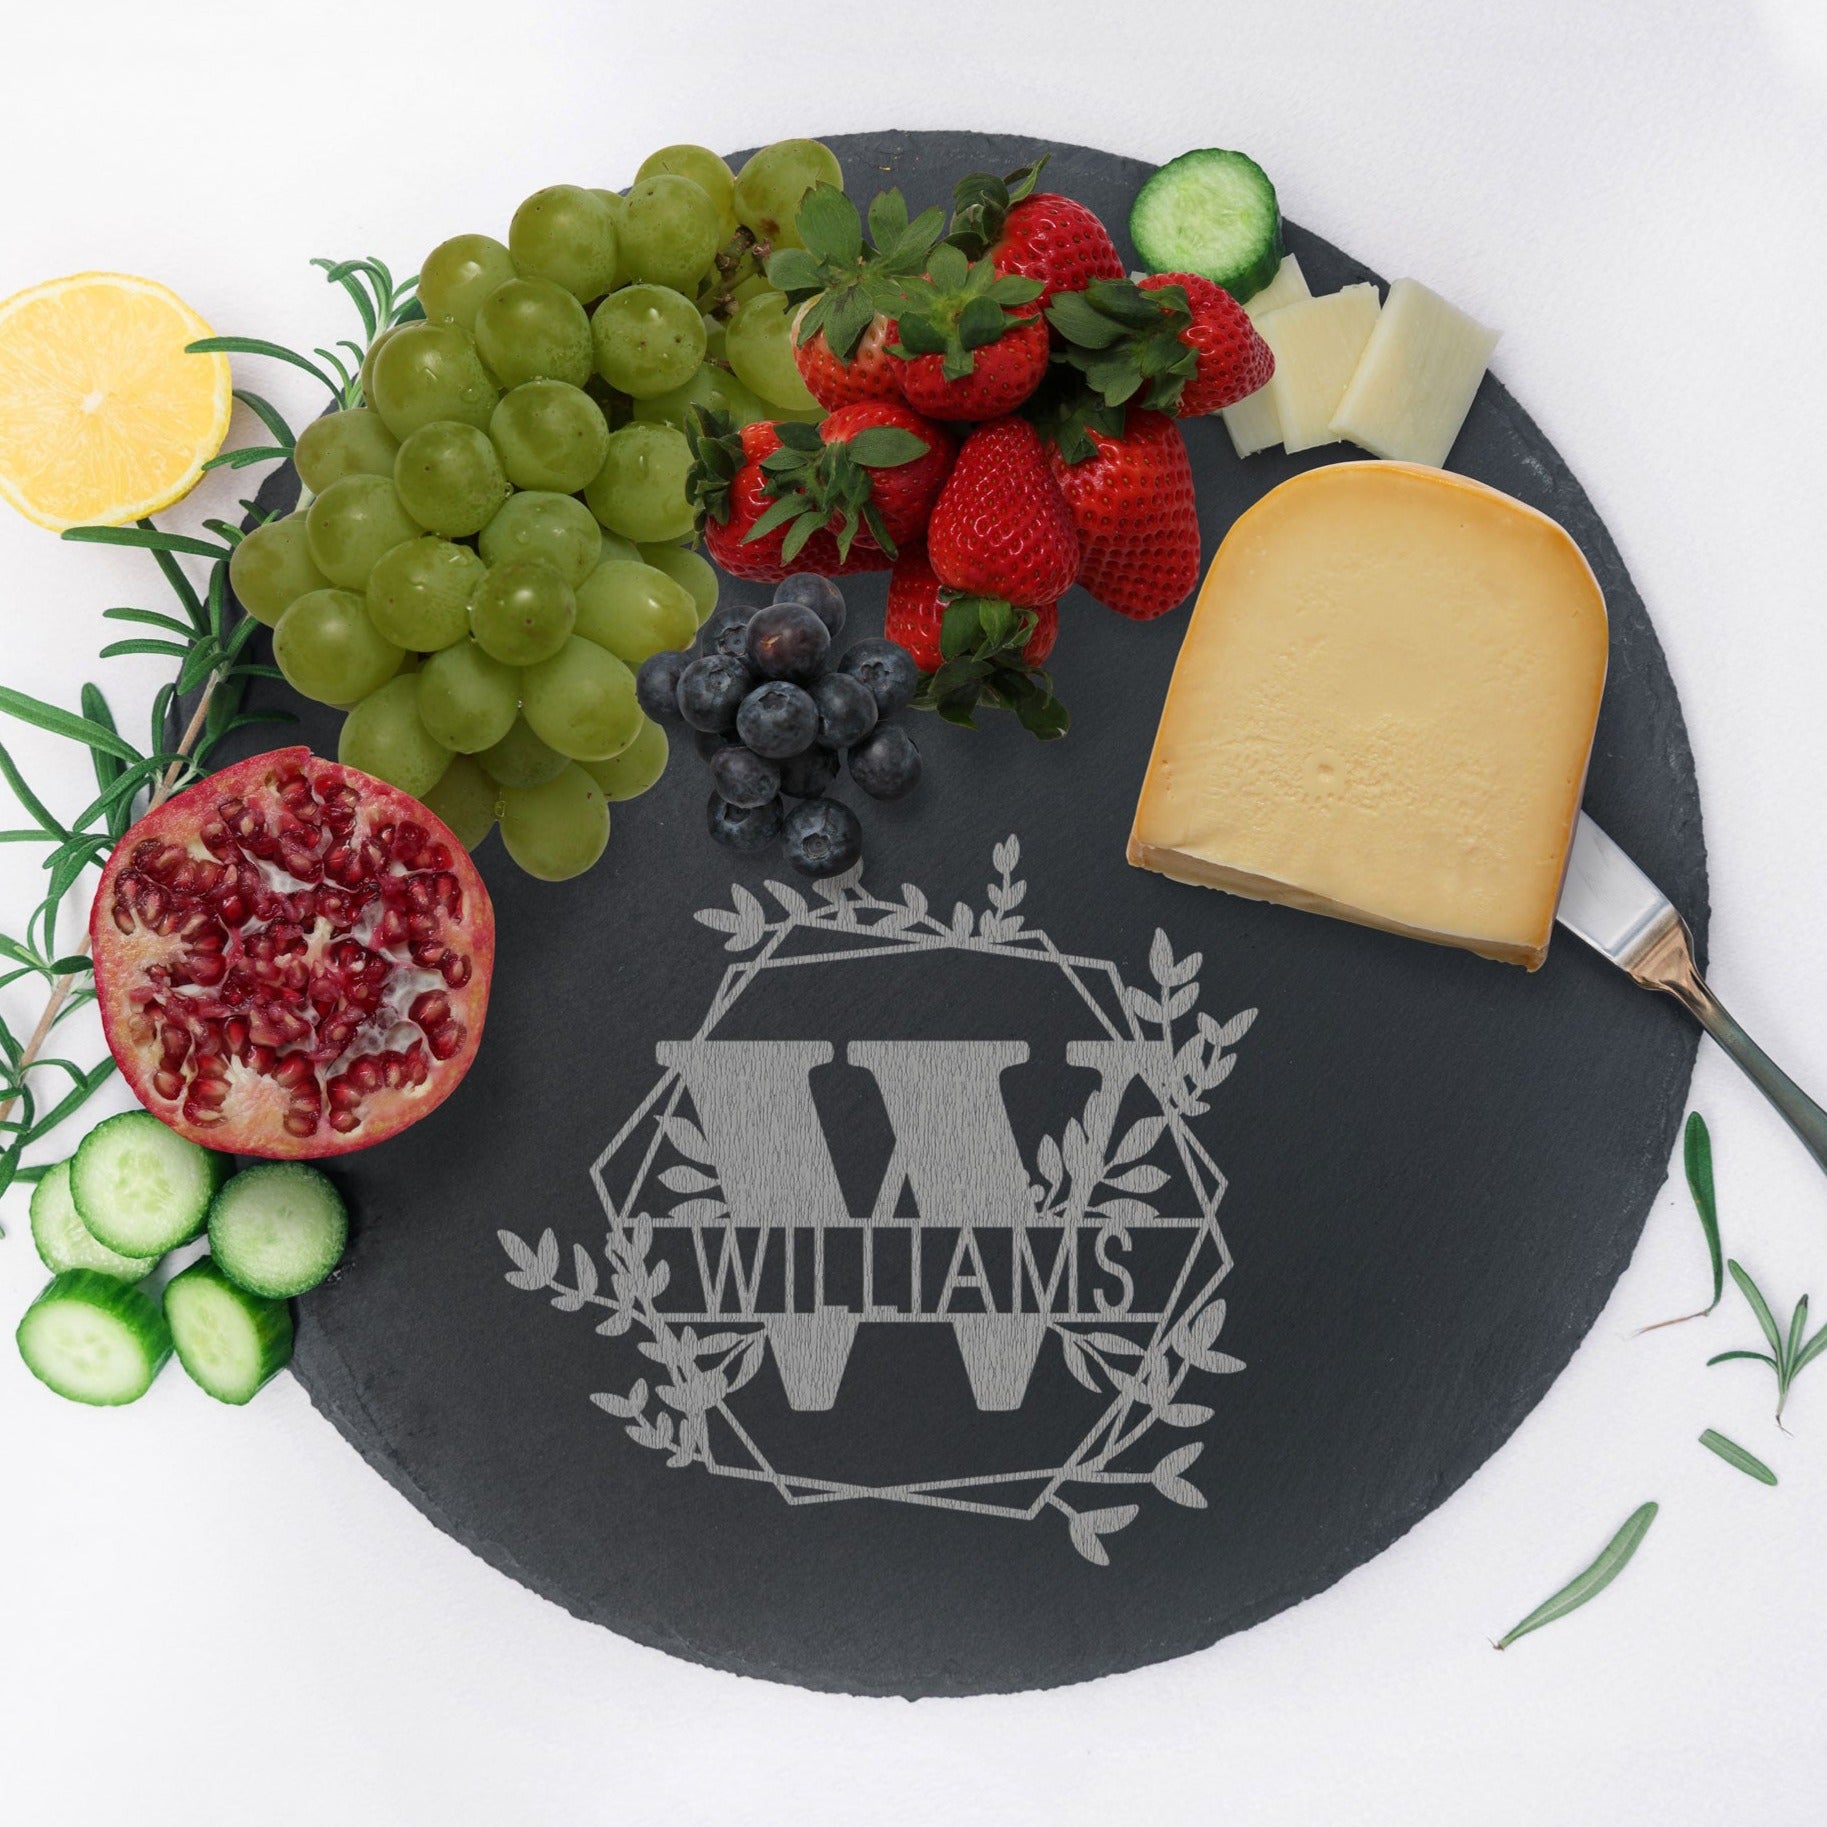 Cheese platters & charcuterie trays for weddings, parties or